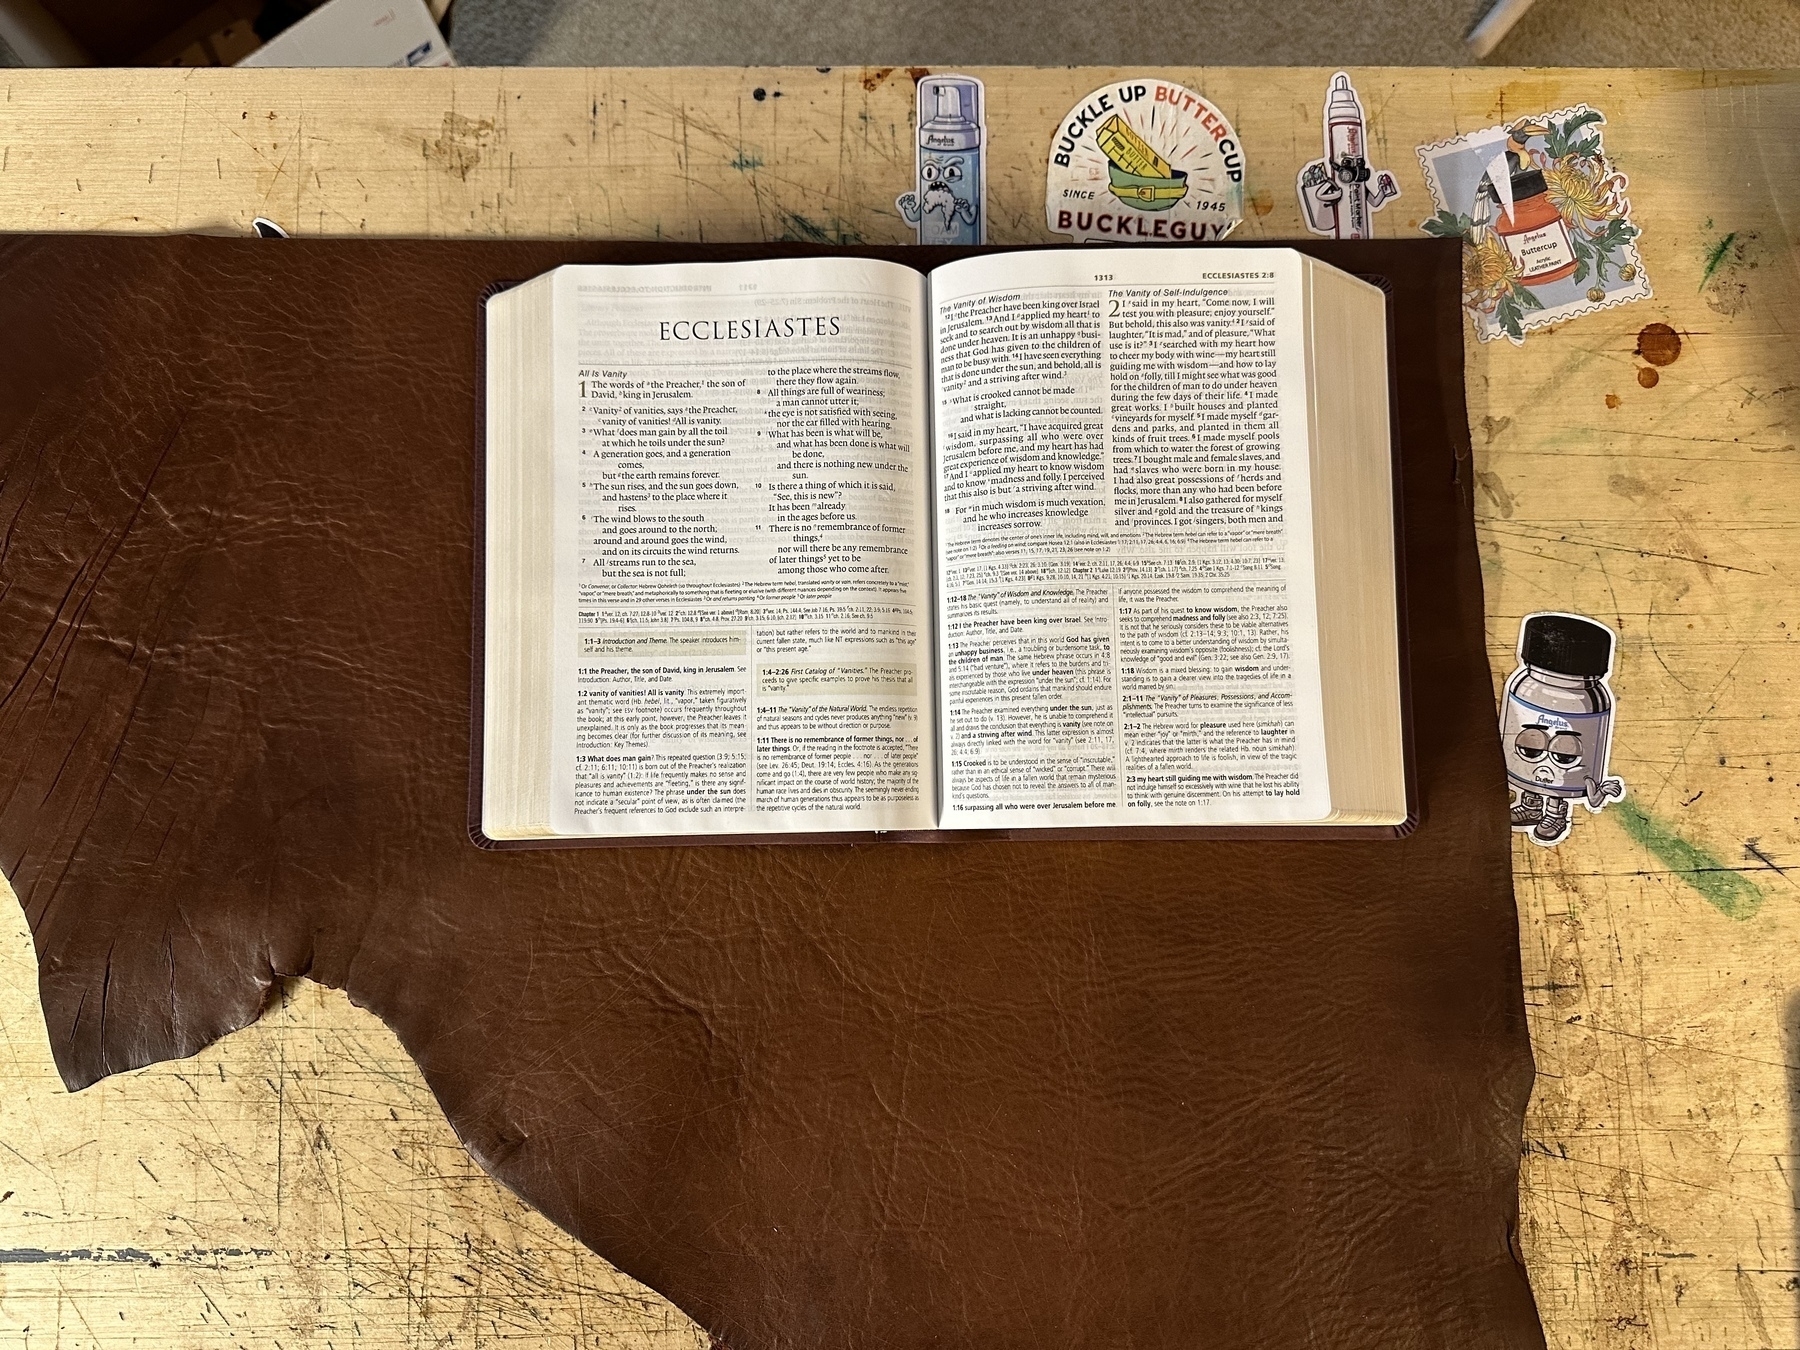 ESV Study Bible laying open on top of a brown leather remnant